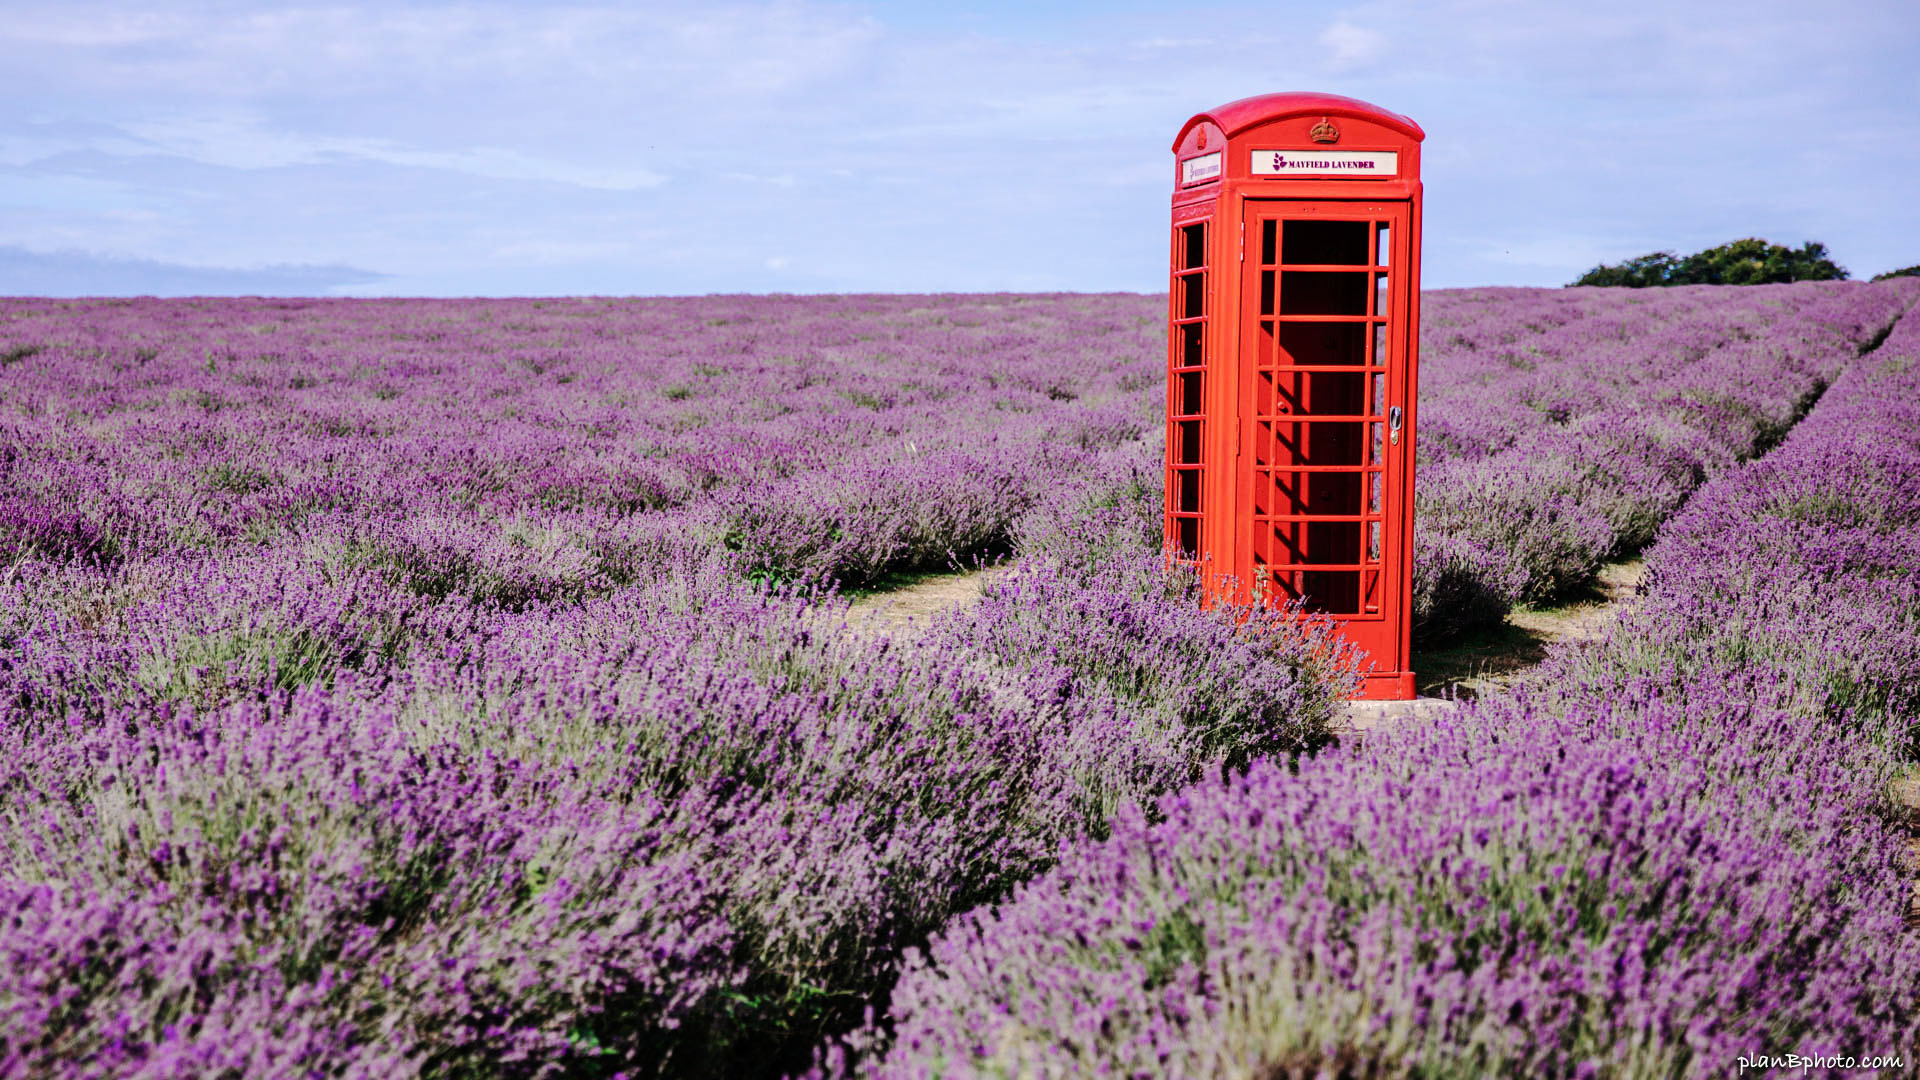 London Red telephone box in the lavender field